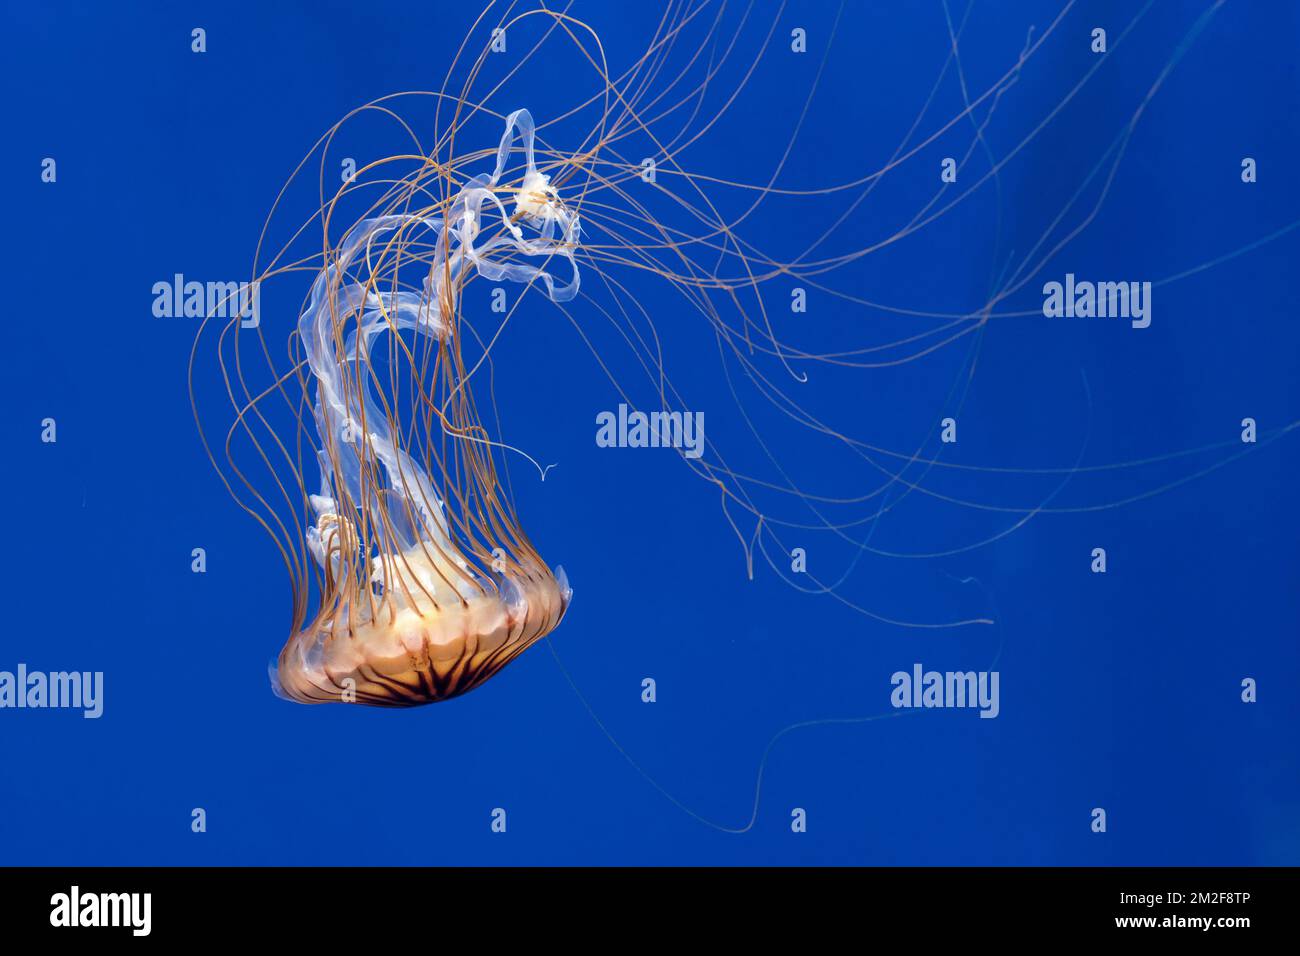 Japanese sea nettle (Chrysaora pacifica) jellyfish swimming underwater showing long trailing tentacles | Méduse striée du Pacifique (Chrysaora pacifica) 09/05/2018 Stock Photo